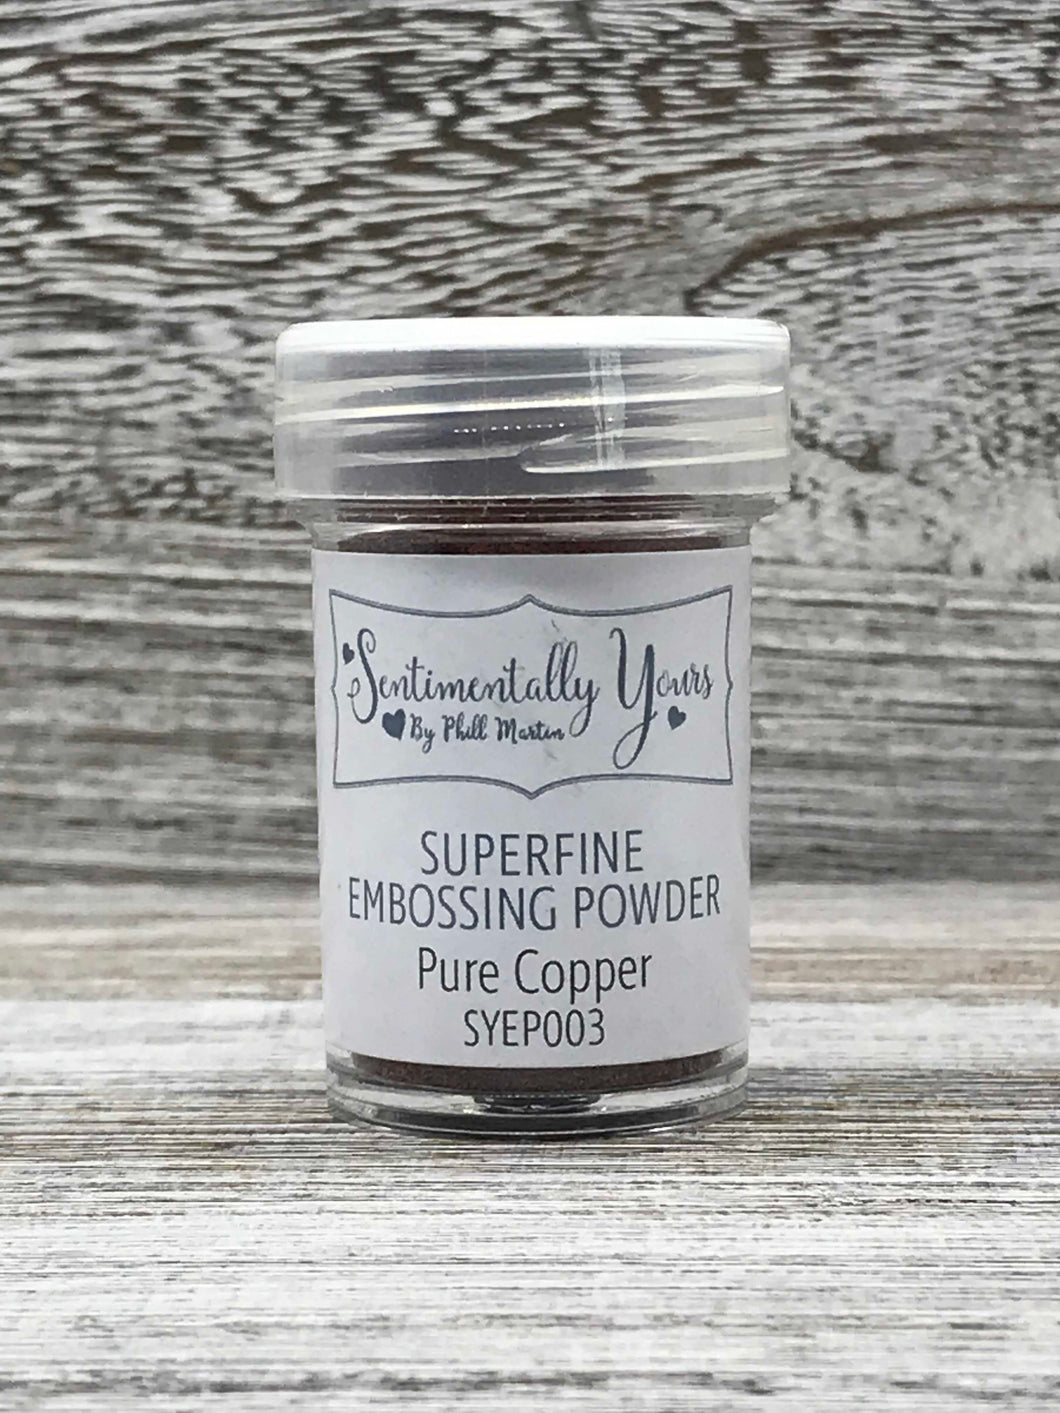 Sentimentally Yours Superfine Embossing Powder - Pure Copper